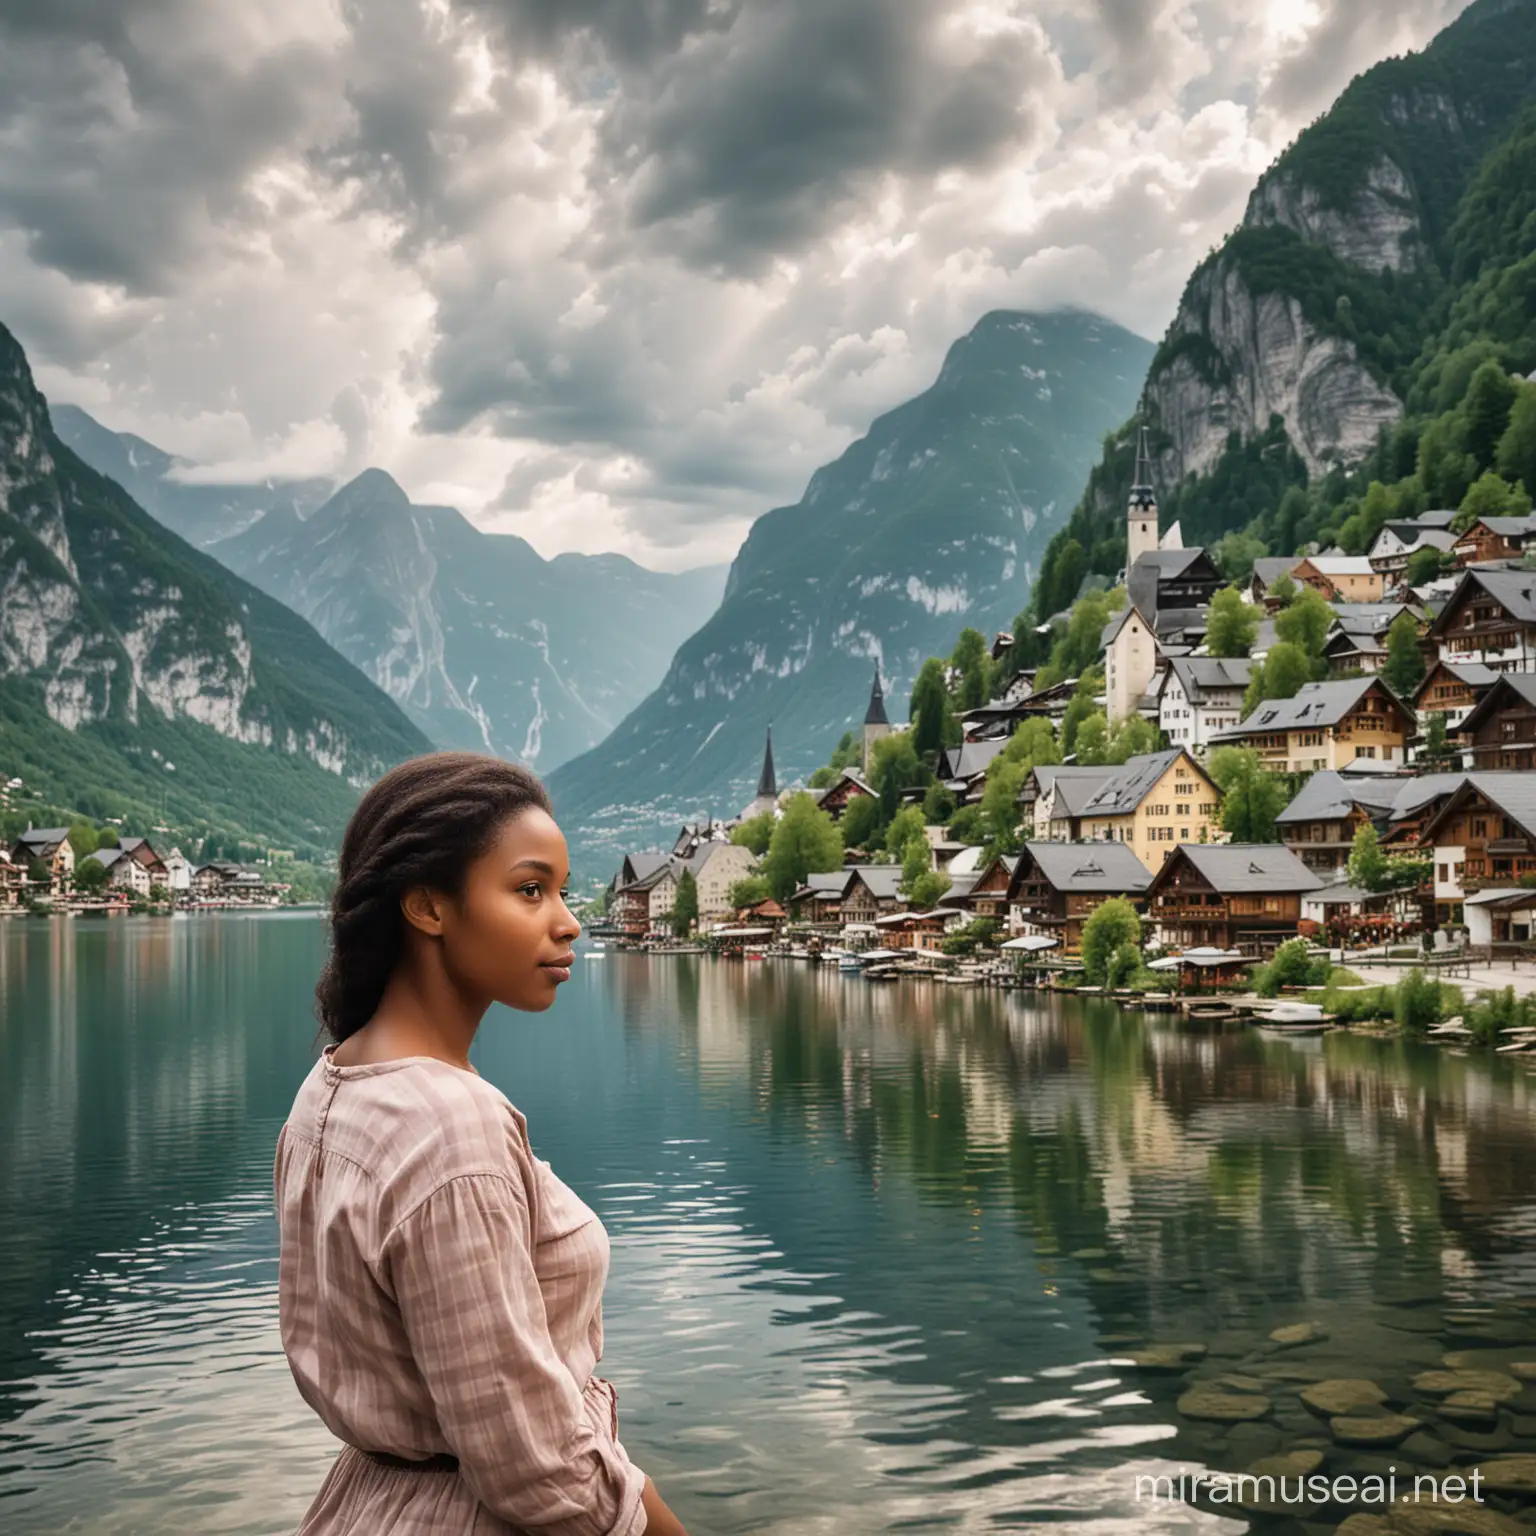 Scenic Townscape of Hallstatt by the Lake